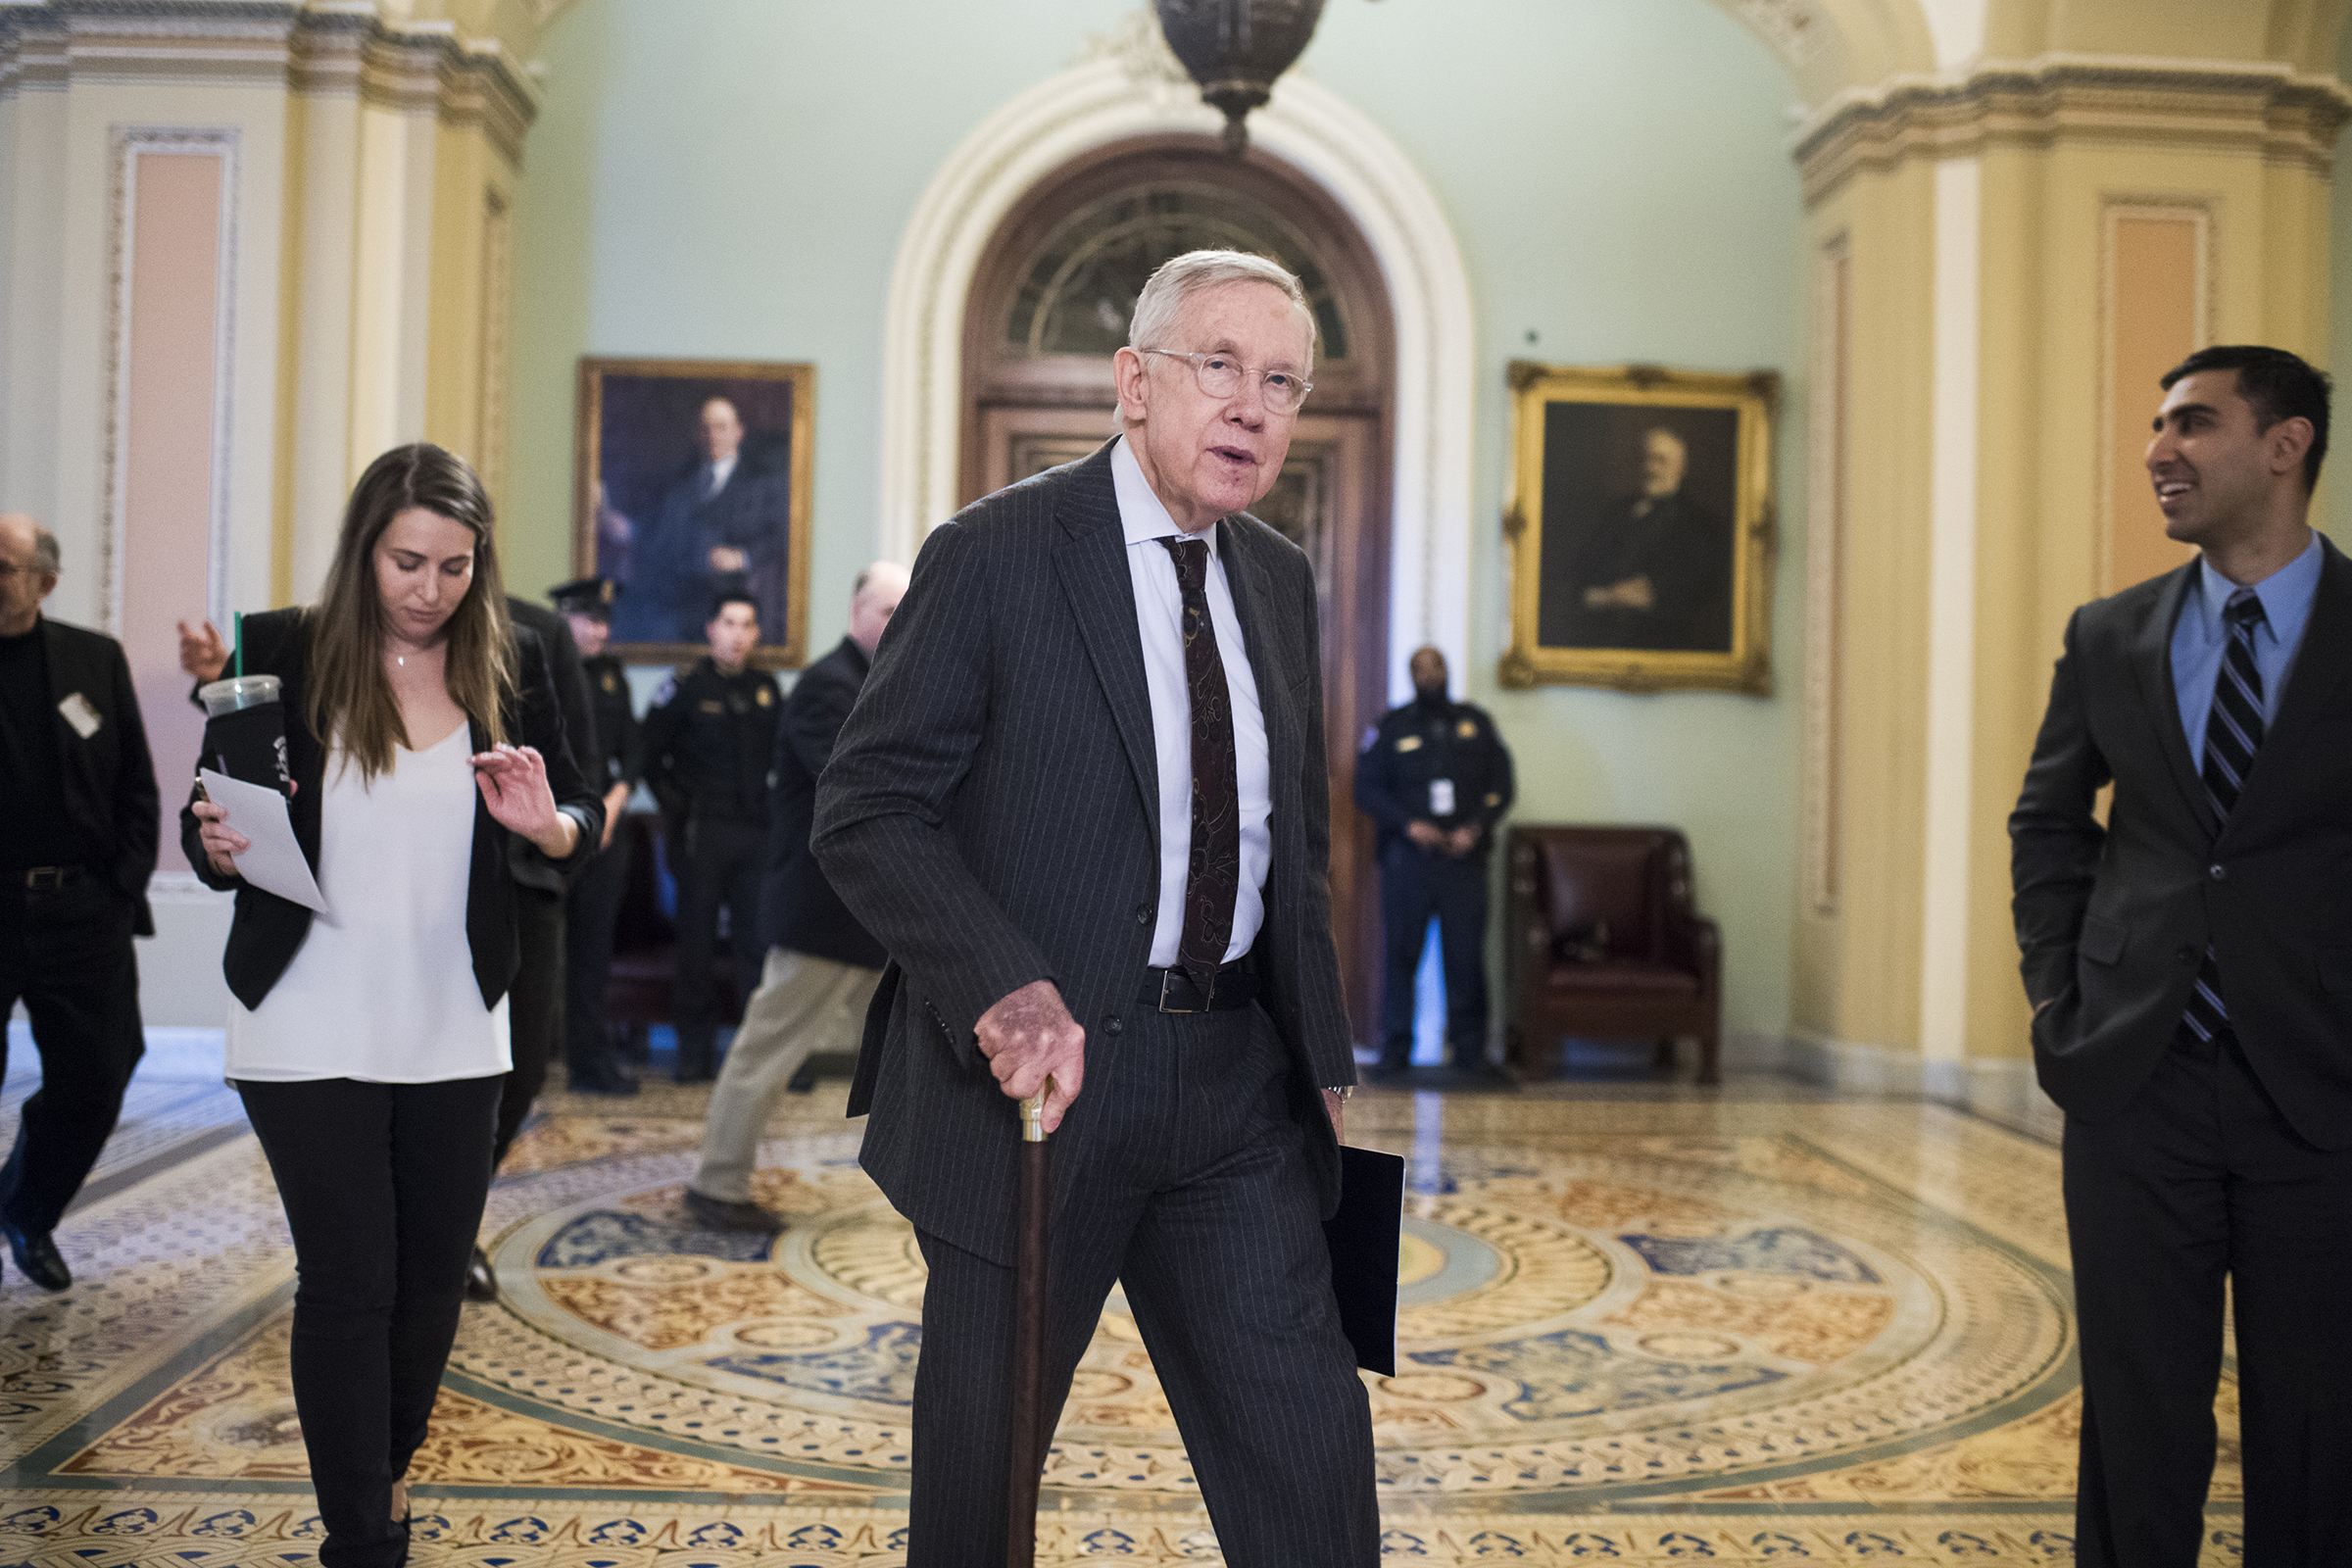 Senate Minority Leader Harry Reid makes his way to an easement signing ceremony in the Capitol to help protect Nevada's Basin and Range National Monument that contains artist Michael Heizer's modern art sculpture 